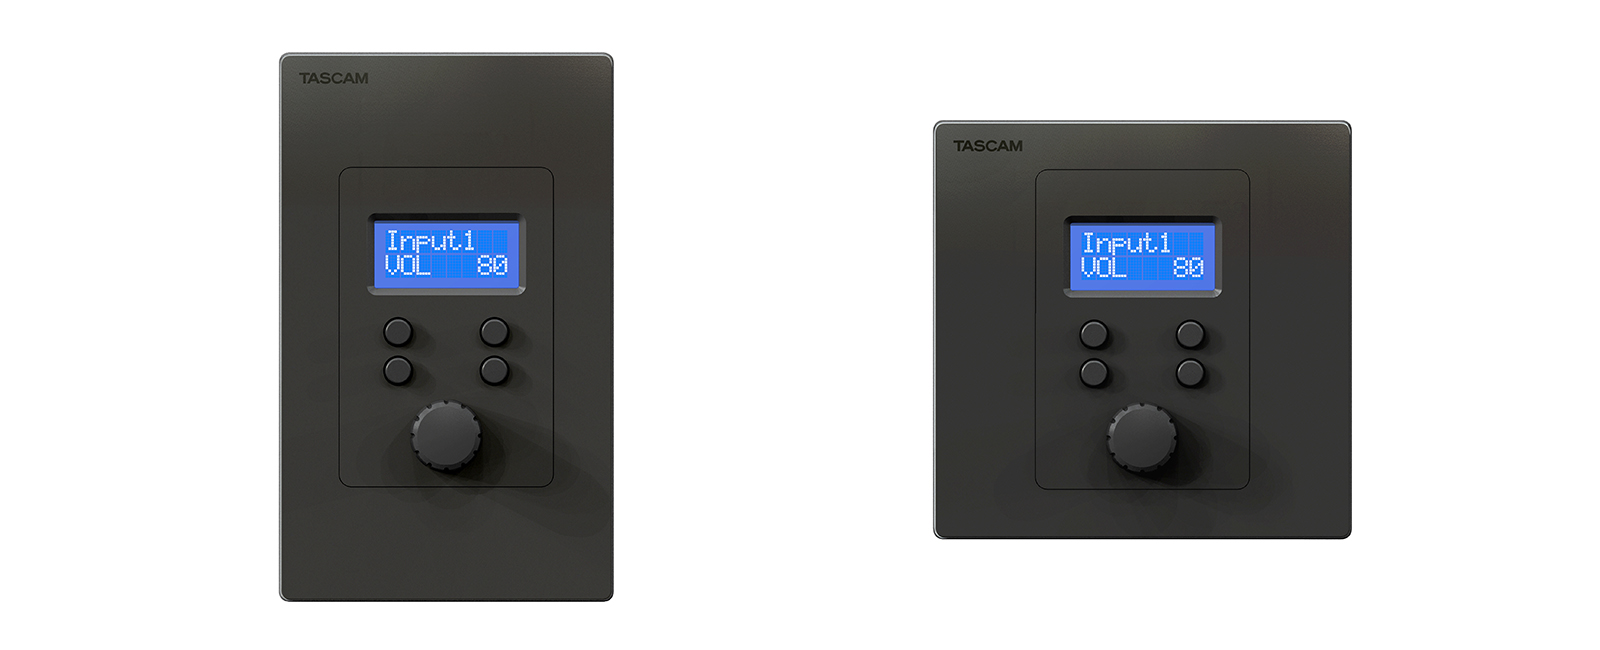 TASCAM Announces RC-W100-R120 / RC-W100-R86 Wall Mount Controllers for the MX-8A Matrix Mixer